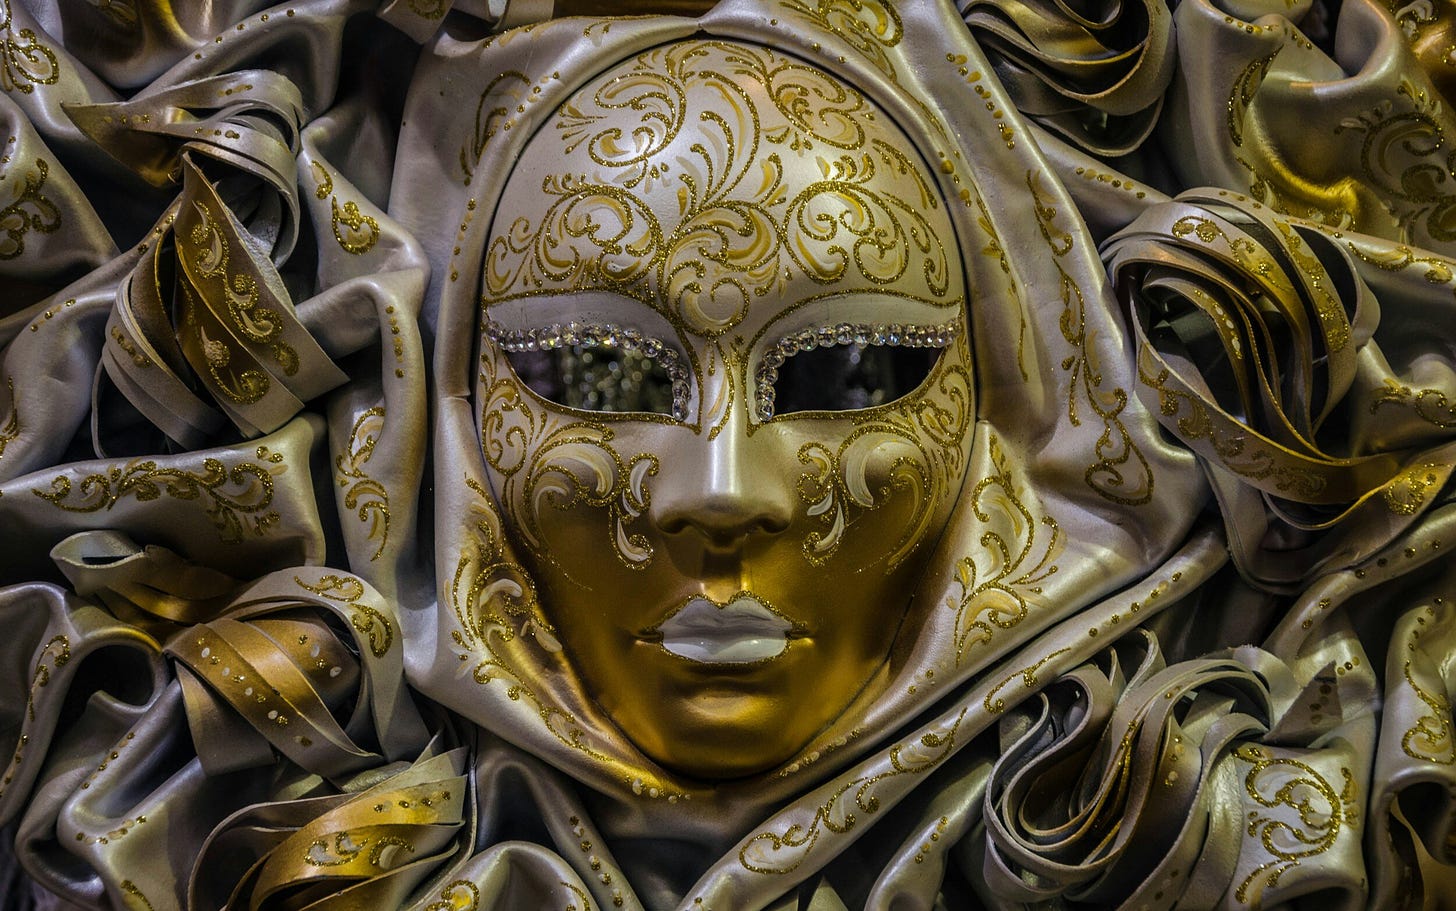 A gold mask